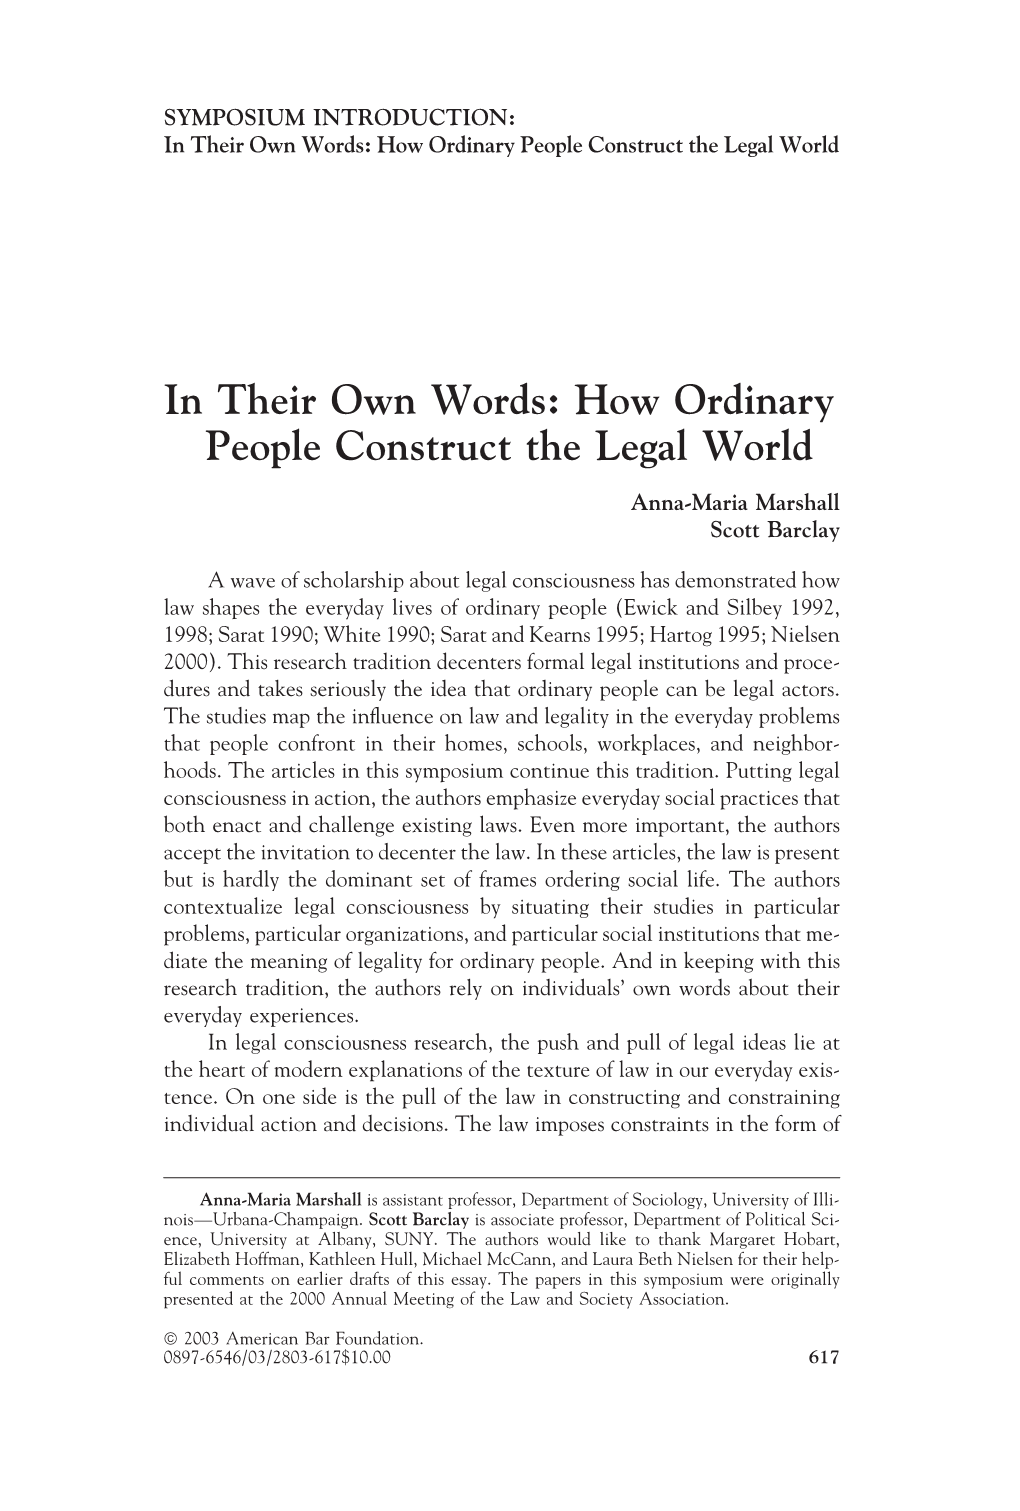 In Their Own Words: How Ordinary People Construct the Legal World